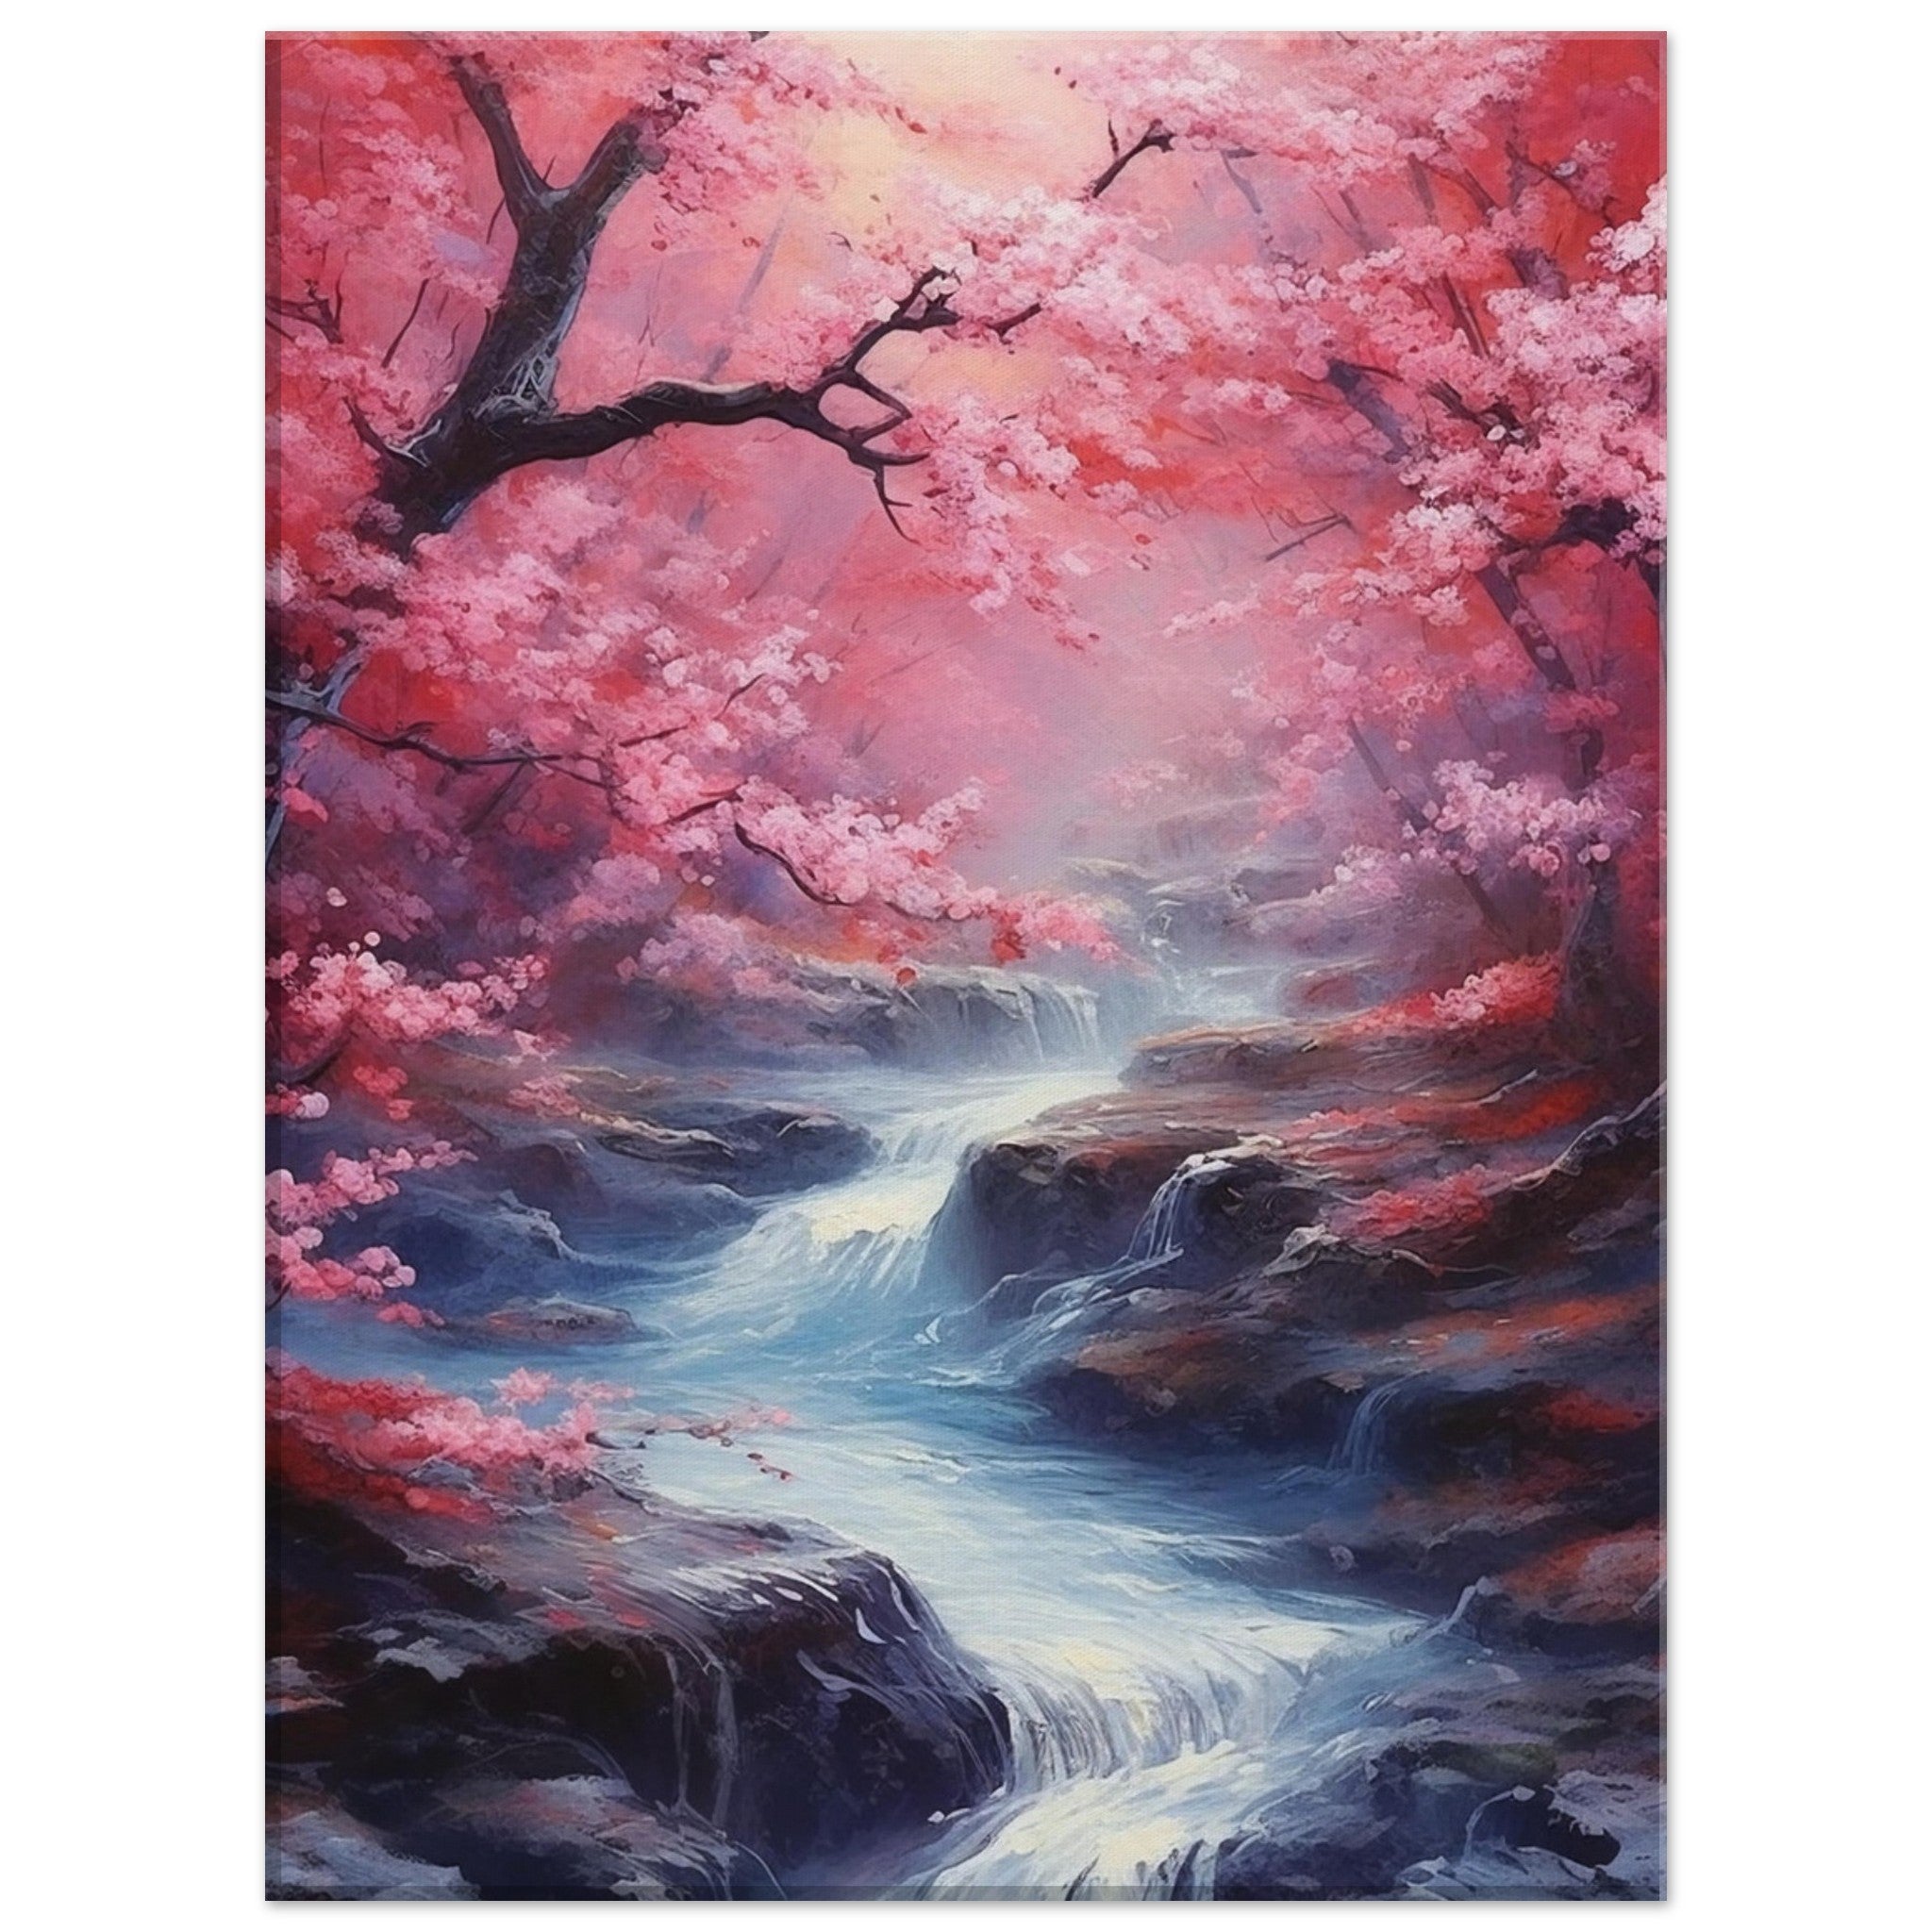 A river flowing through cherry blossom jungle - immersiarts